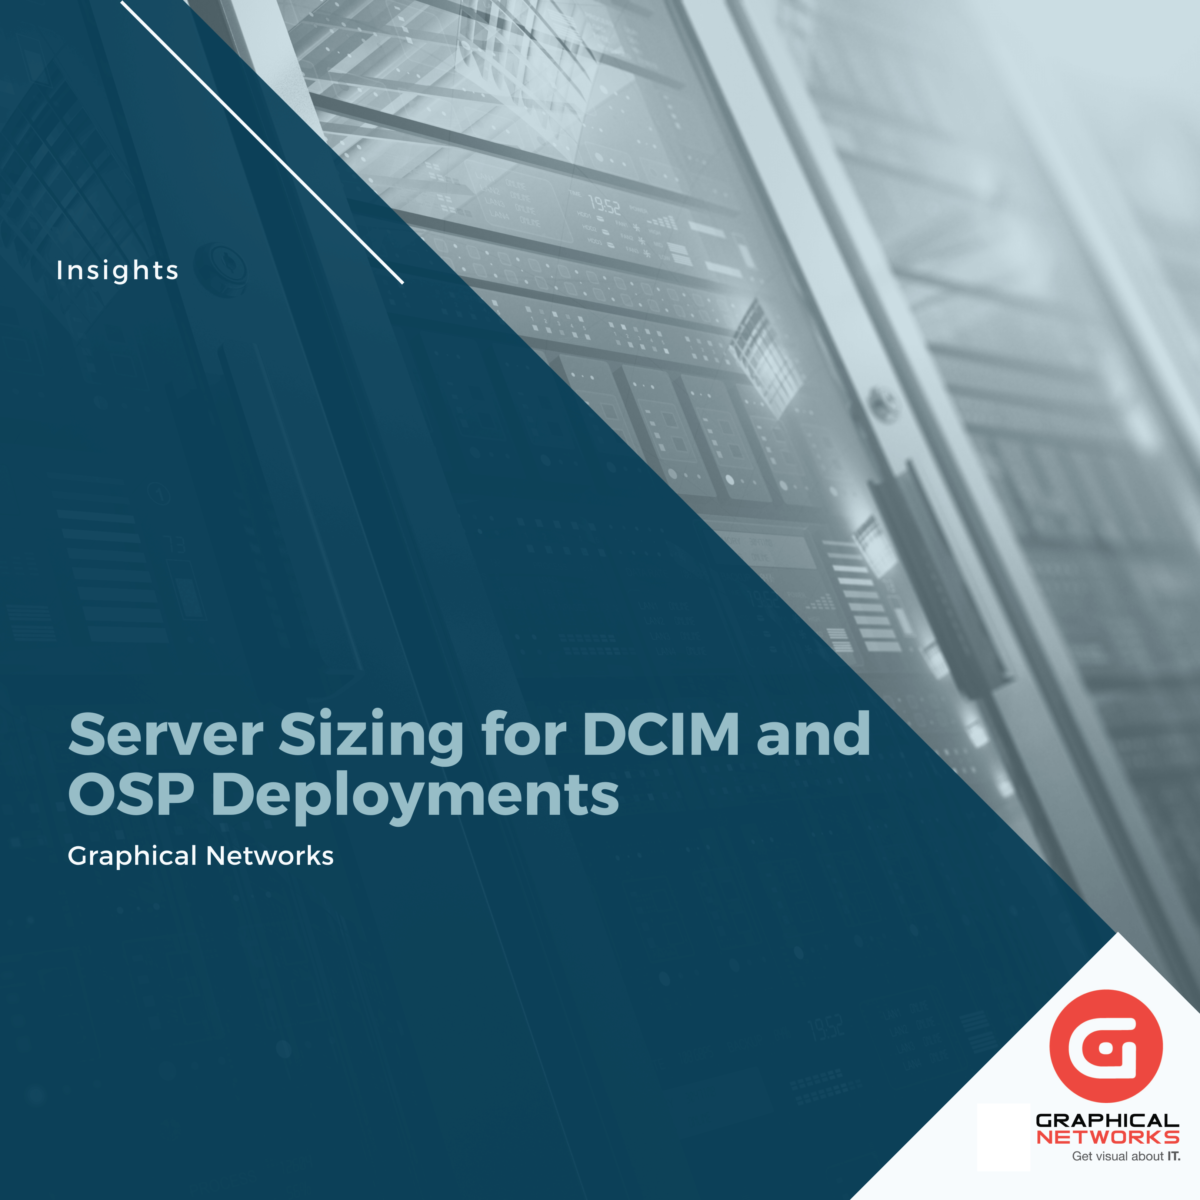 Server Sizing for DCIM and OSP Deployments